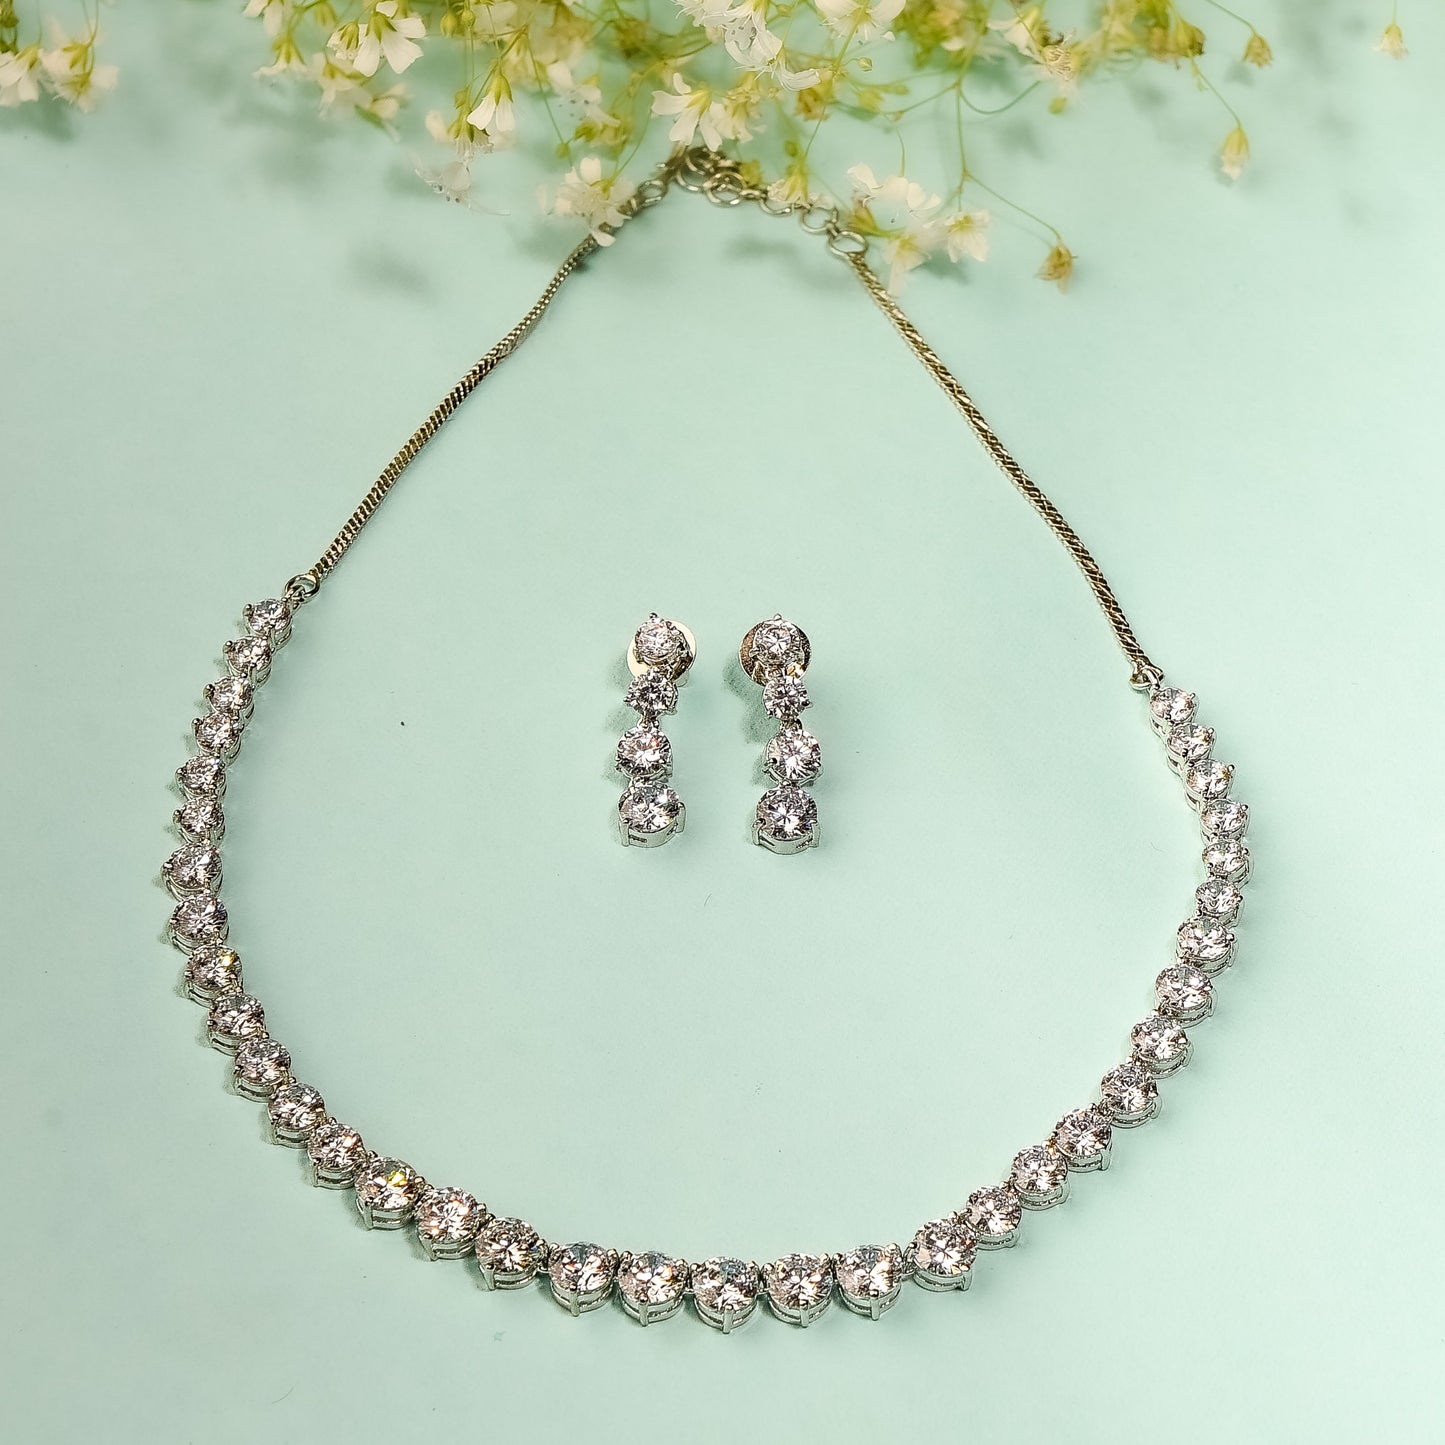 Timeless solitaire necklace